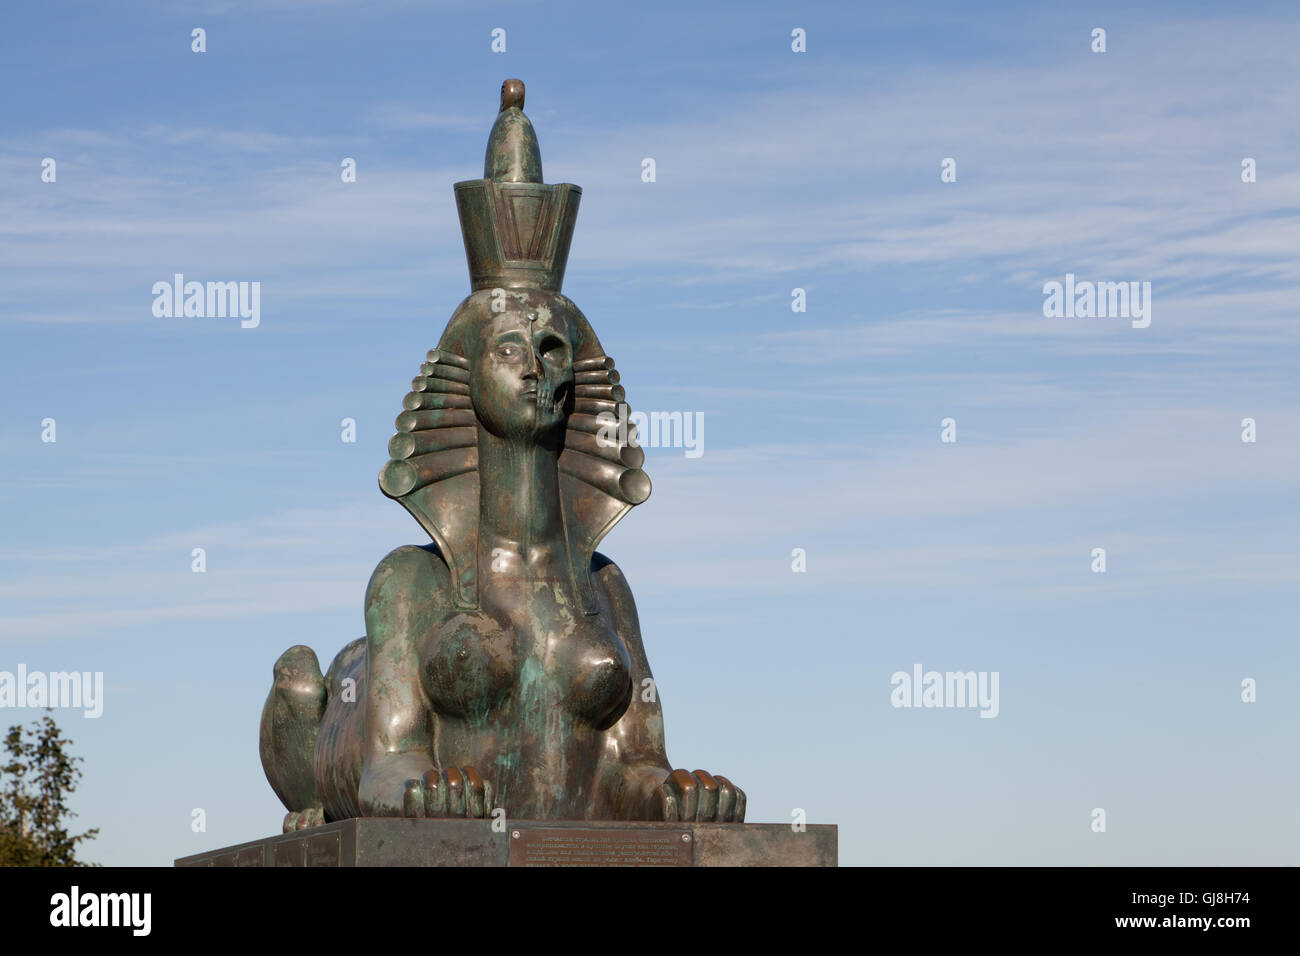 The monument "To the Victims of Political Repression" (Metaphysical sphinxes). St. Petersburg, Russia. Stock Photo